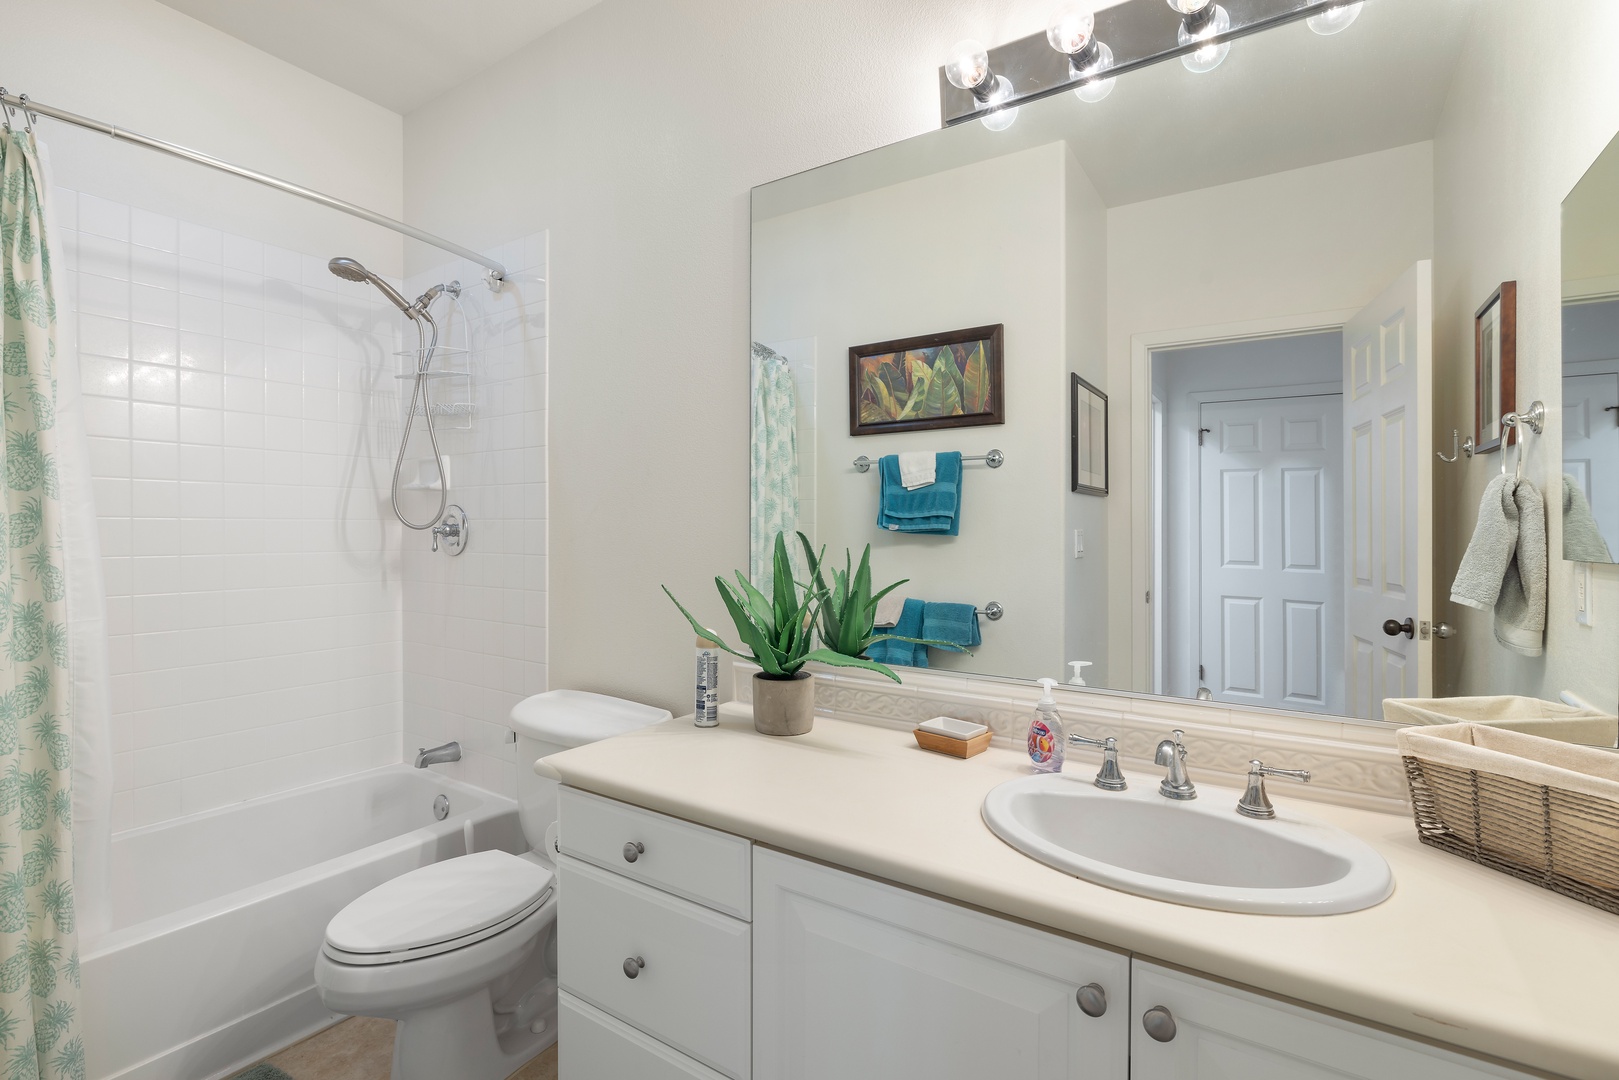 Kapolei Vacation Rentals, Coconut Plantation 1190-1 - The second guest bathroom with a shower.